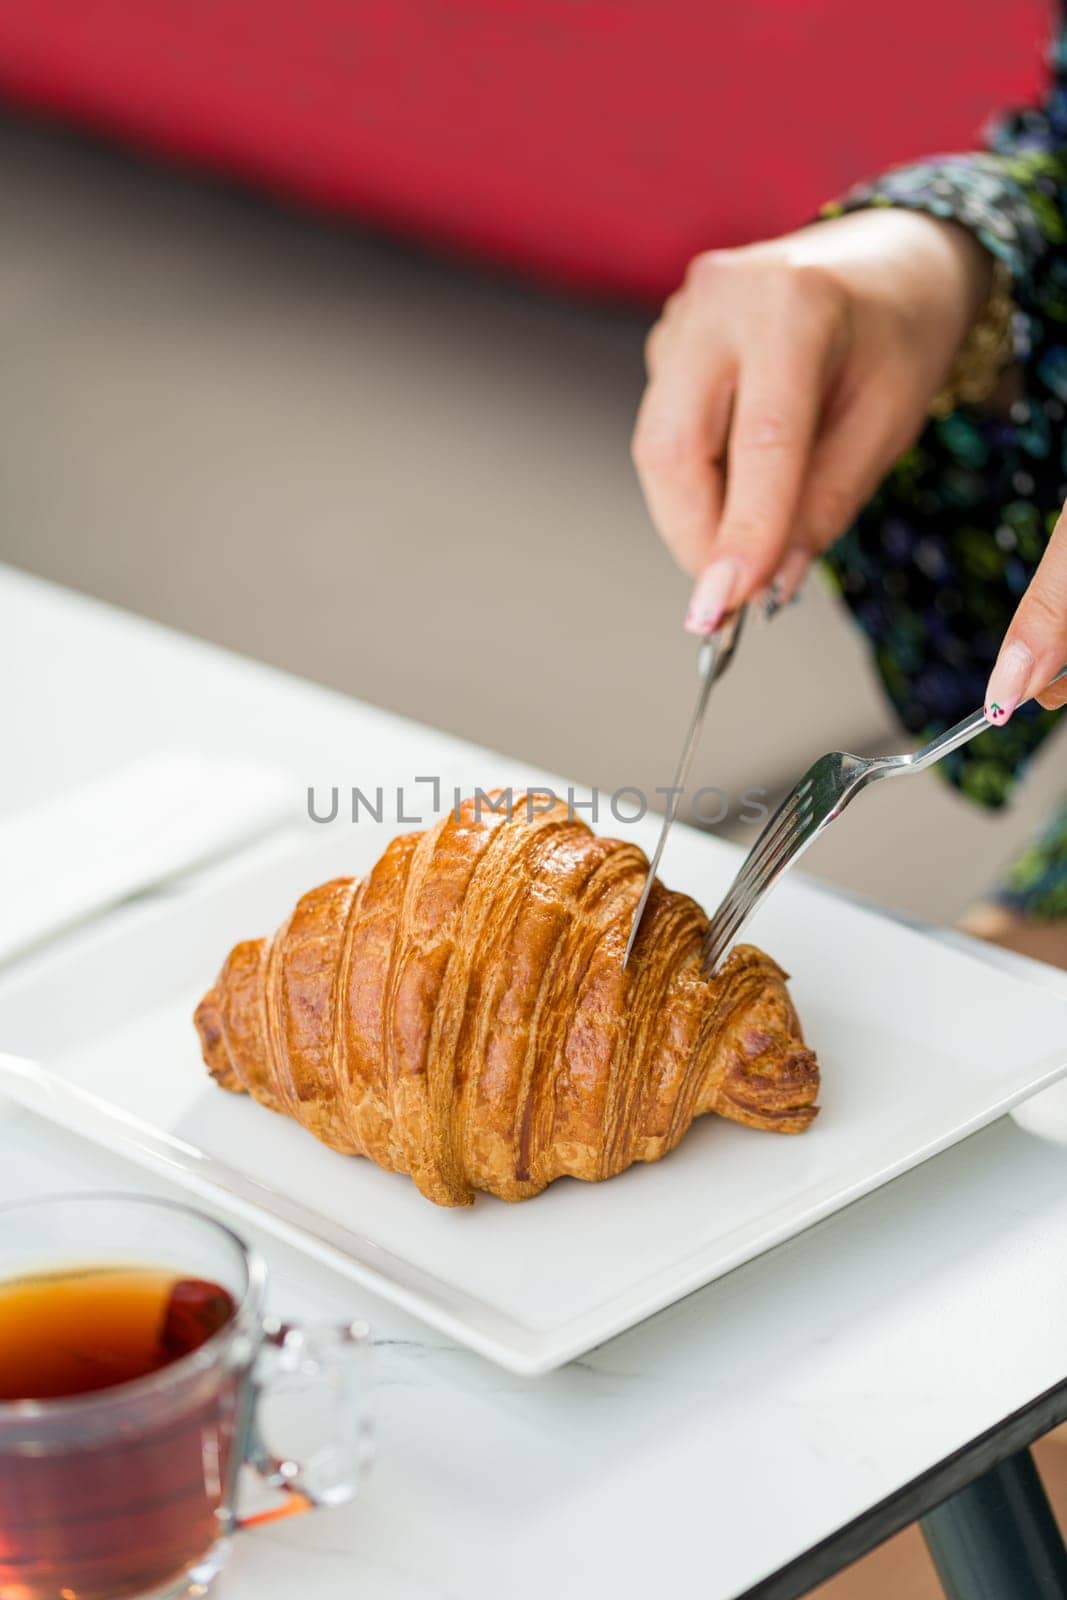 Croissant on a white porcelain plate with tea on the side by Sonat